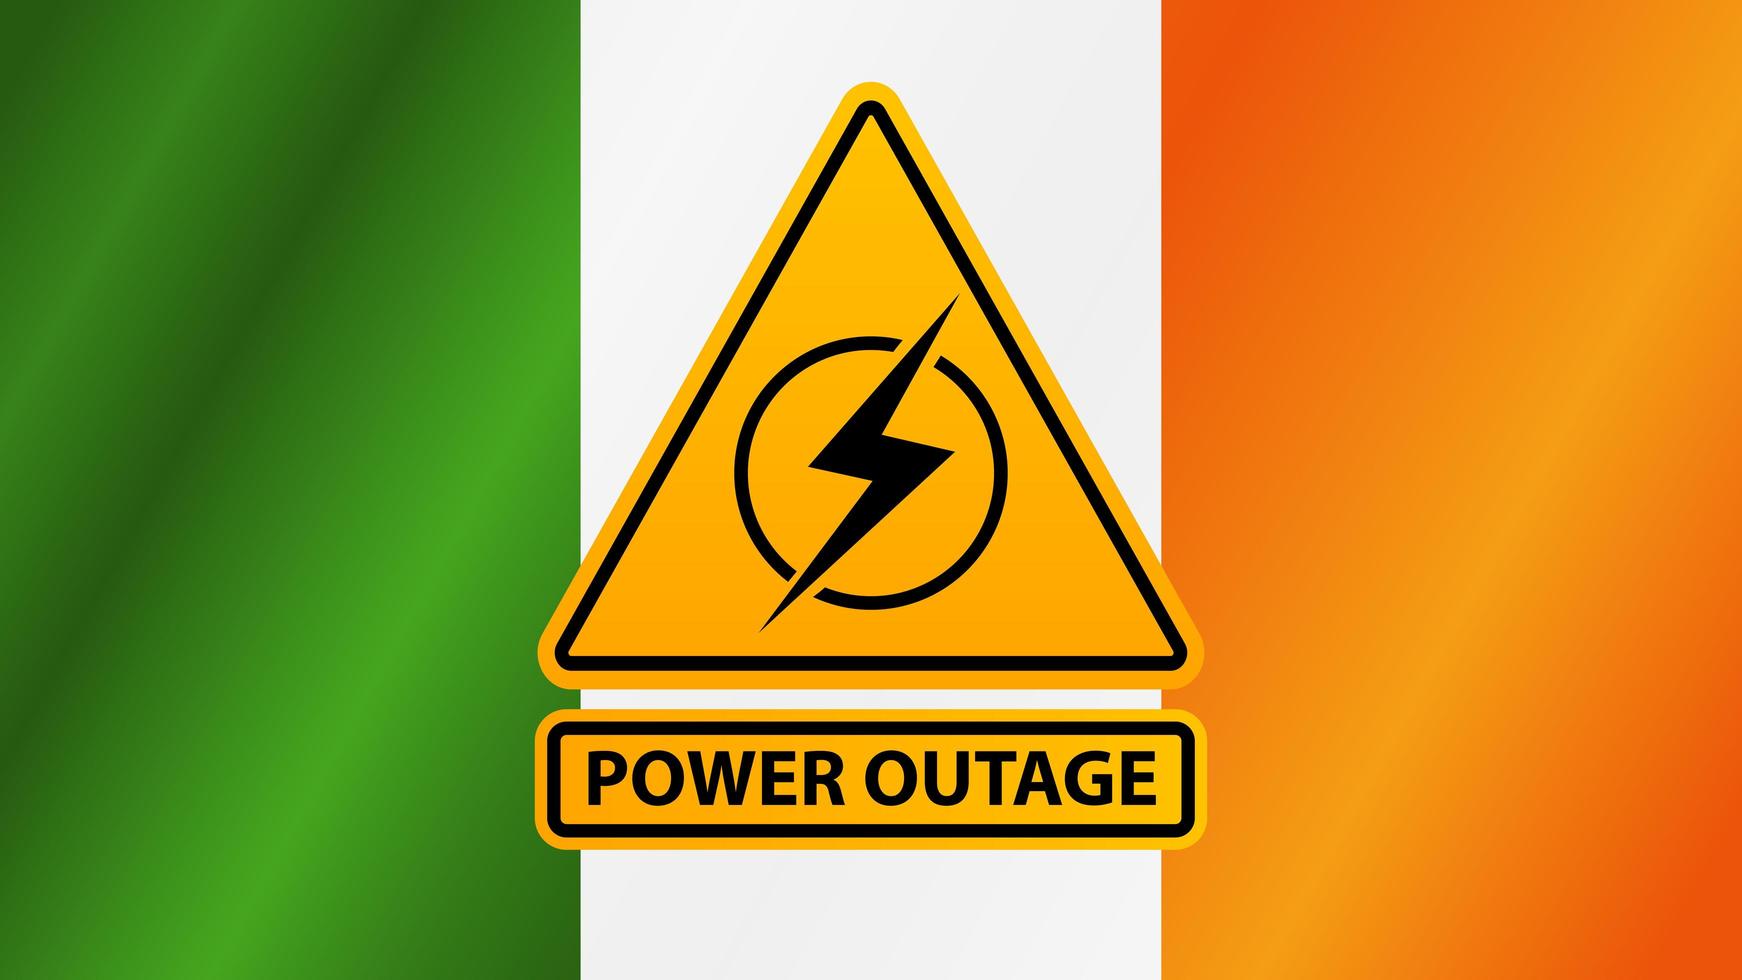 Power outage, yellow warning sign on the background of the flag of Ireland vector